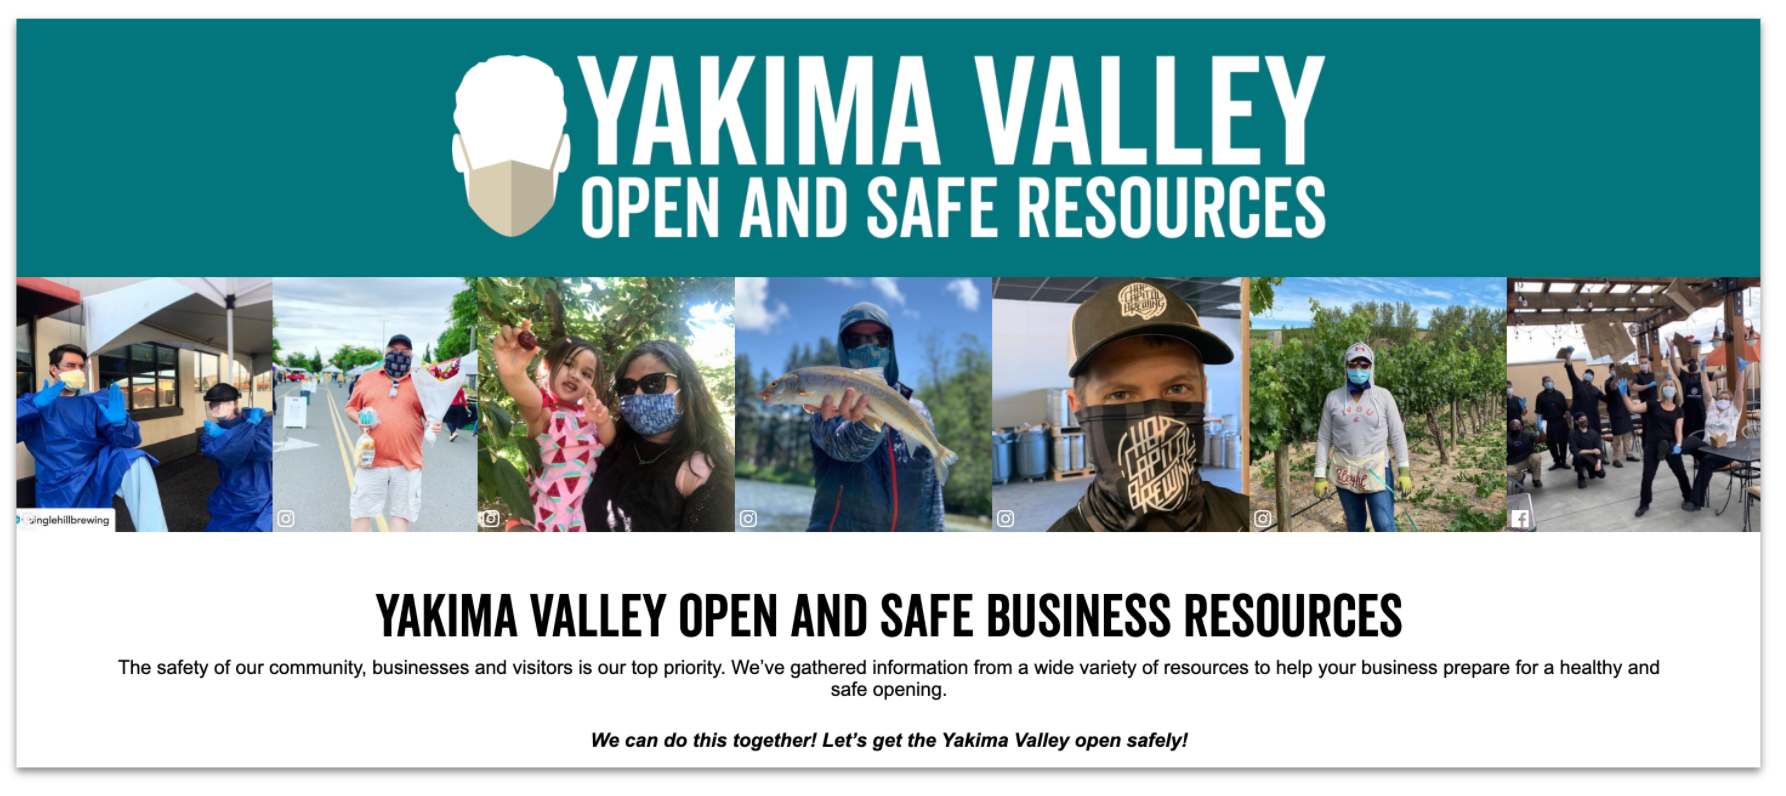 Yakima valley safe business resources